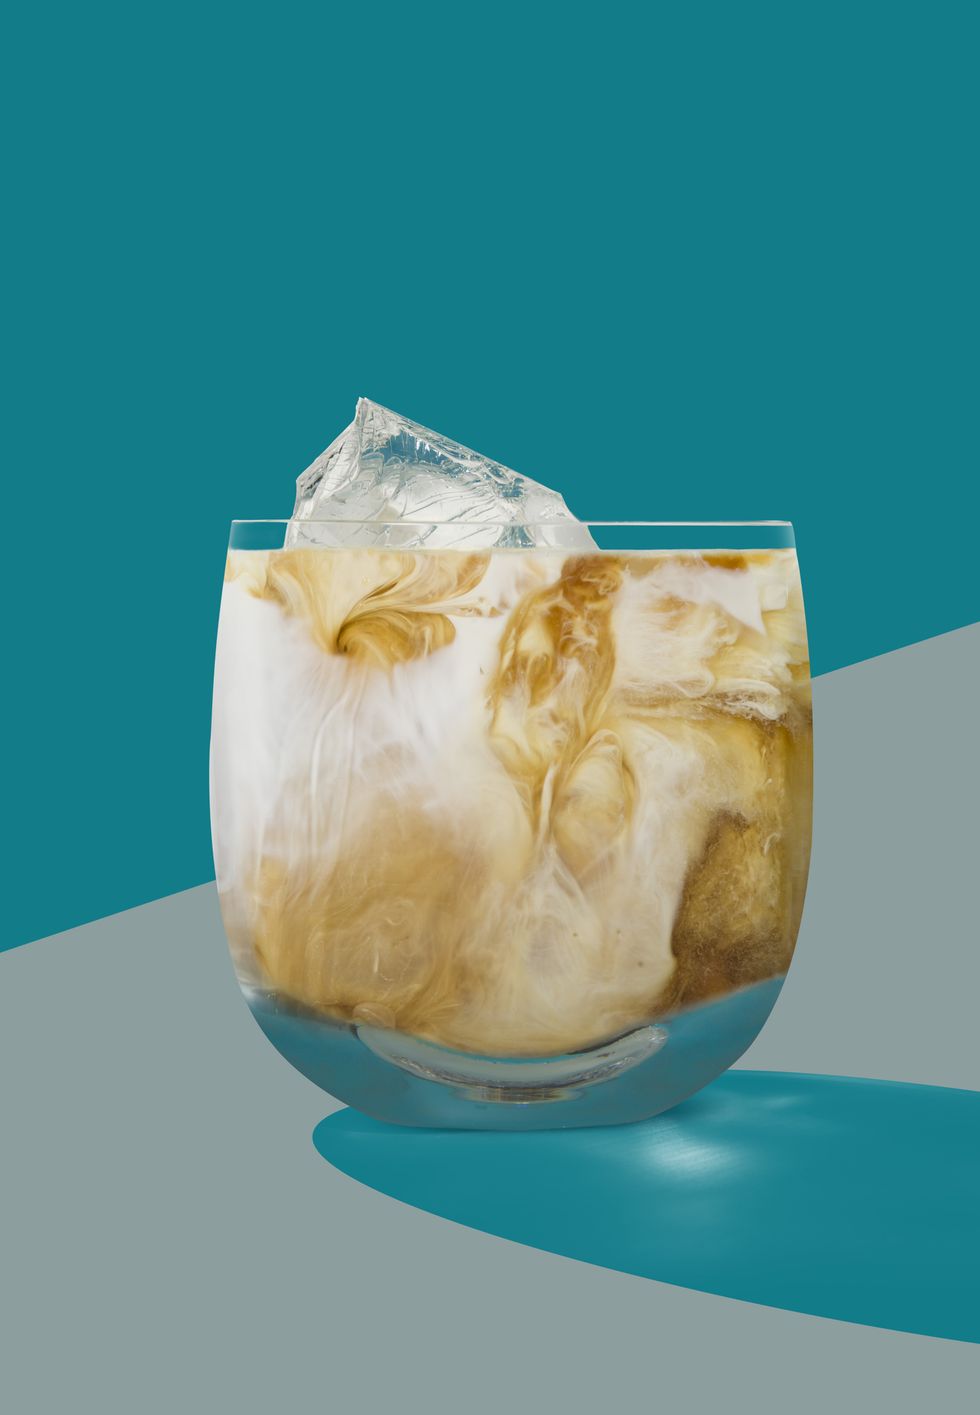 white russian cocktail shot in a flat art deco style on a graphic turquoise and grey background with a defined shadow